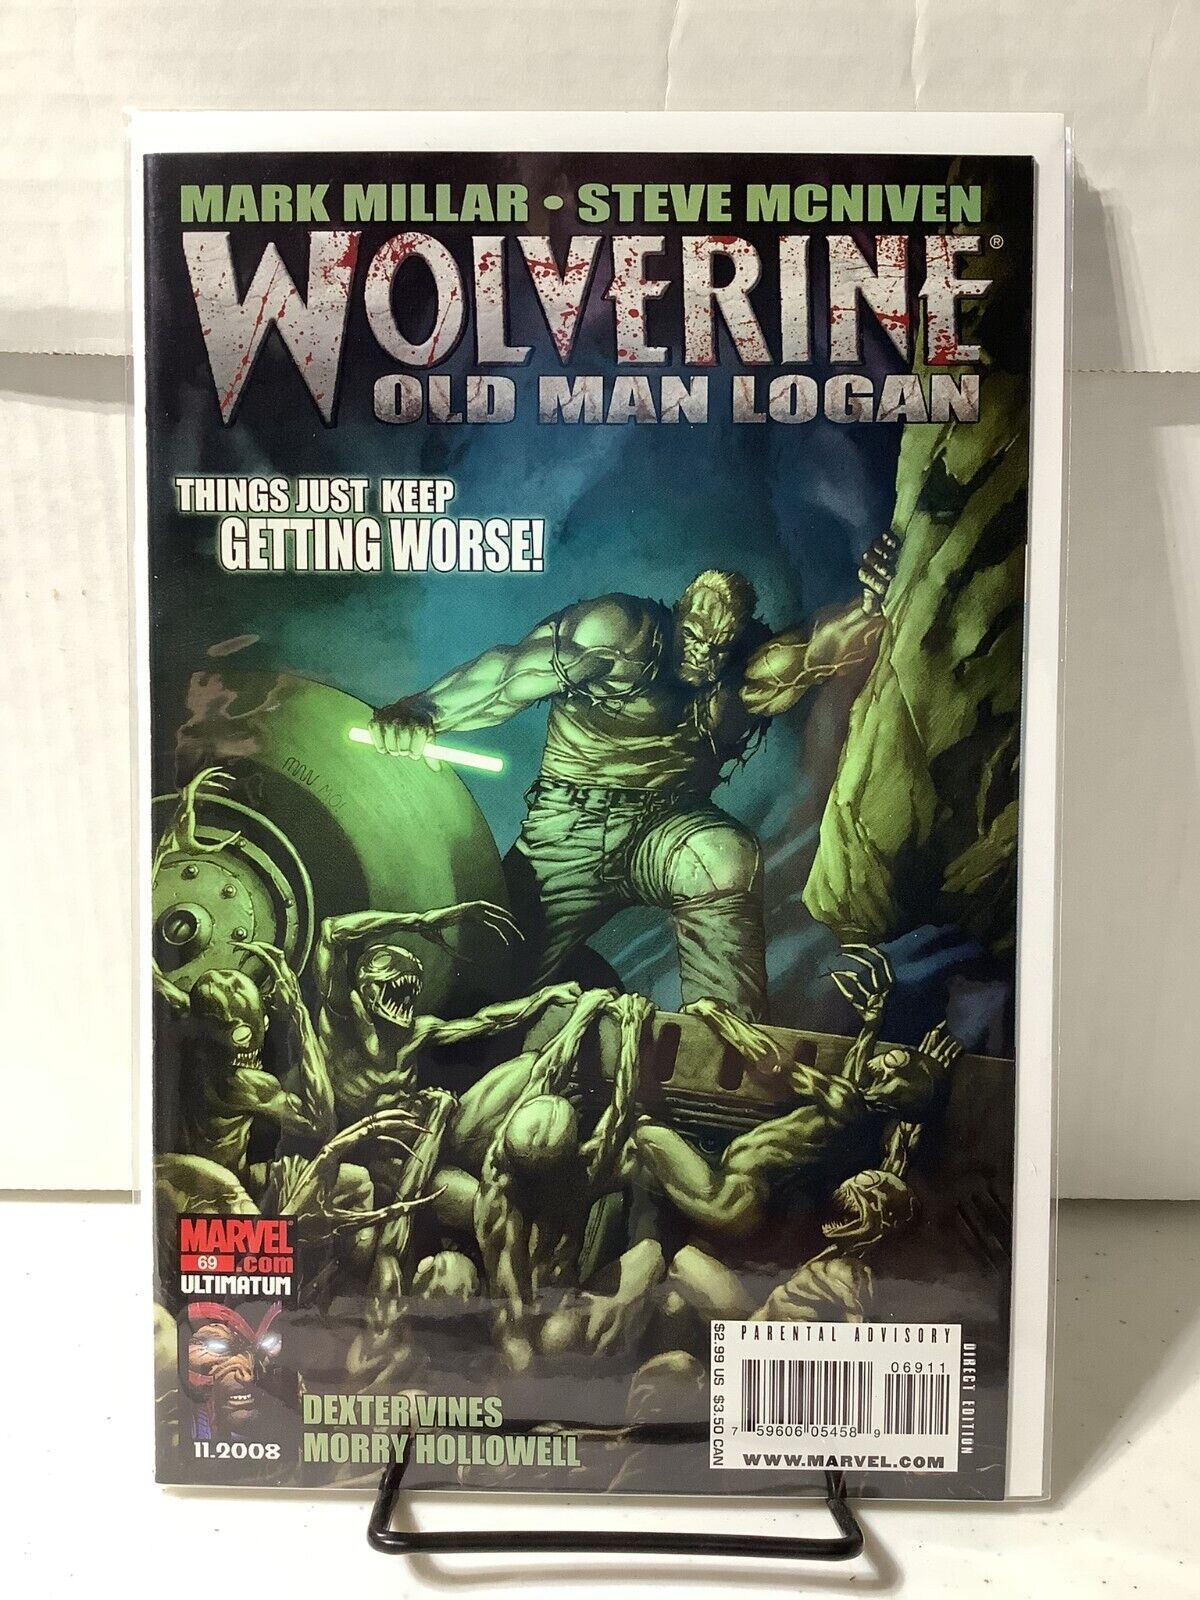 Wolverine Vol. 3 # 69 - # 74 - New Unread Unopened - Combined Shipping Available